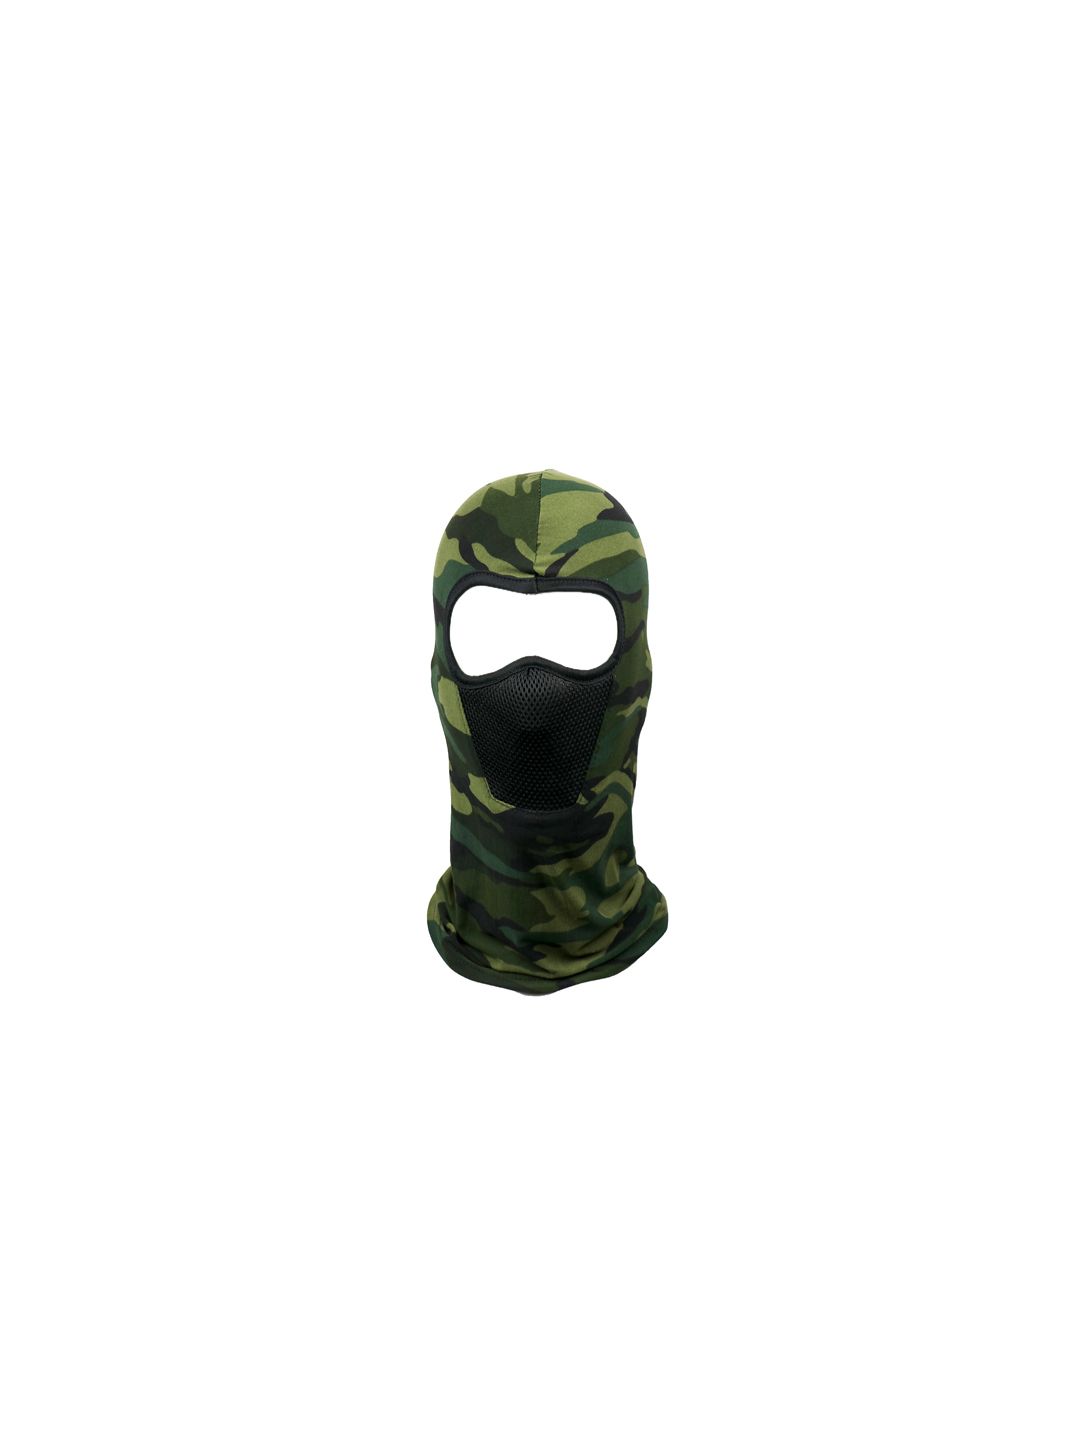 iSWEVEN Unisex Green & Black Camouflaged Printed Balaclava Cap Price in India